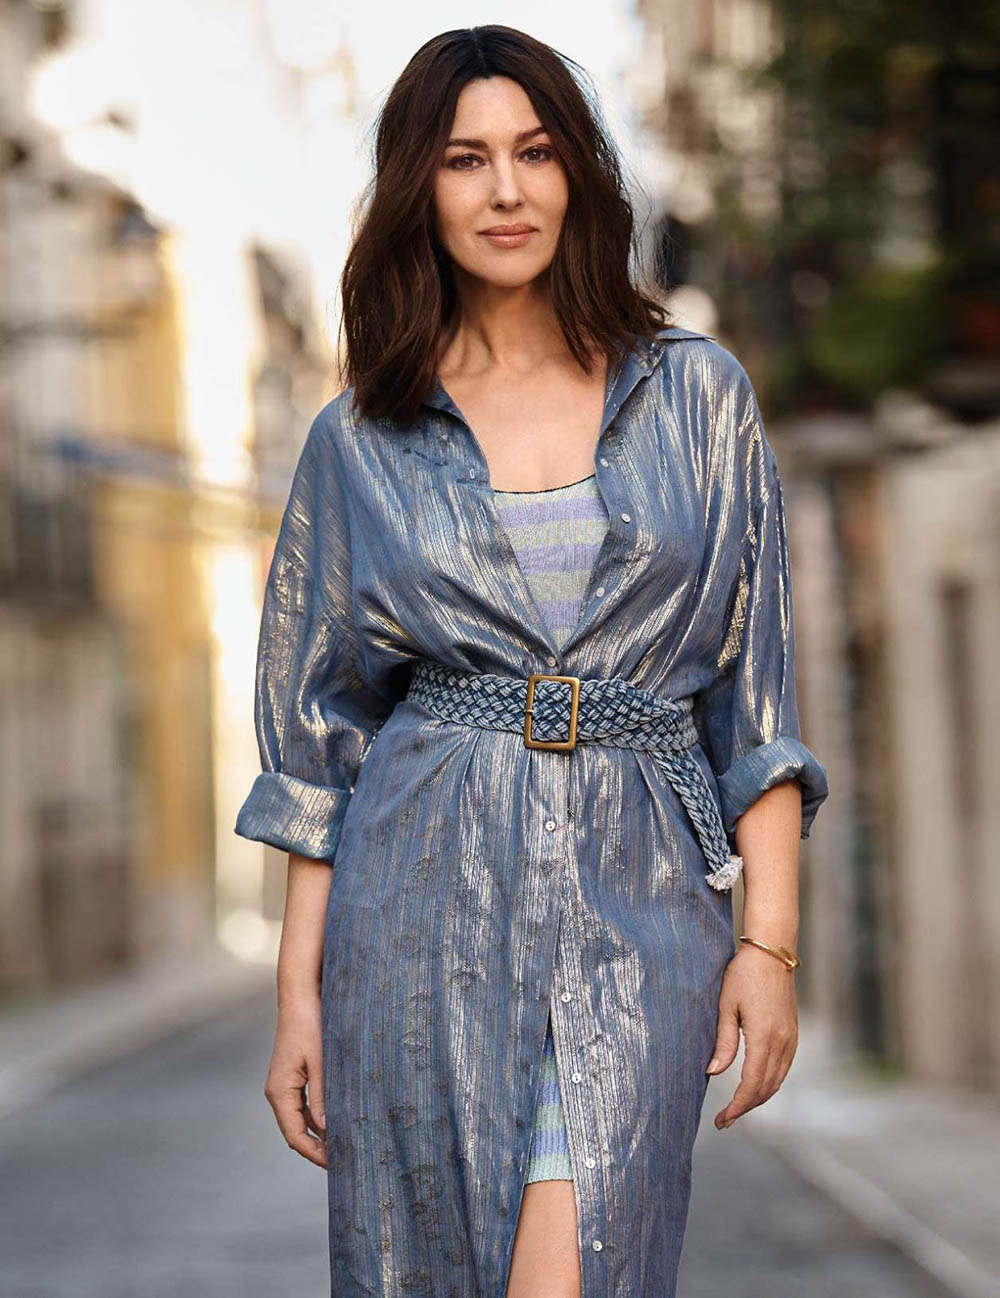 Monica Bellucci covers Elle France July 6th, 2018 by Myro Wulff